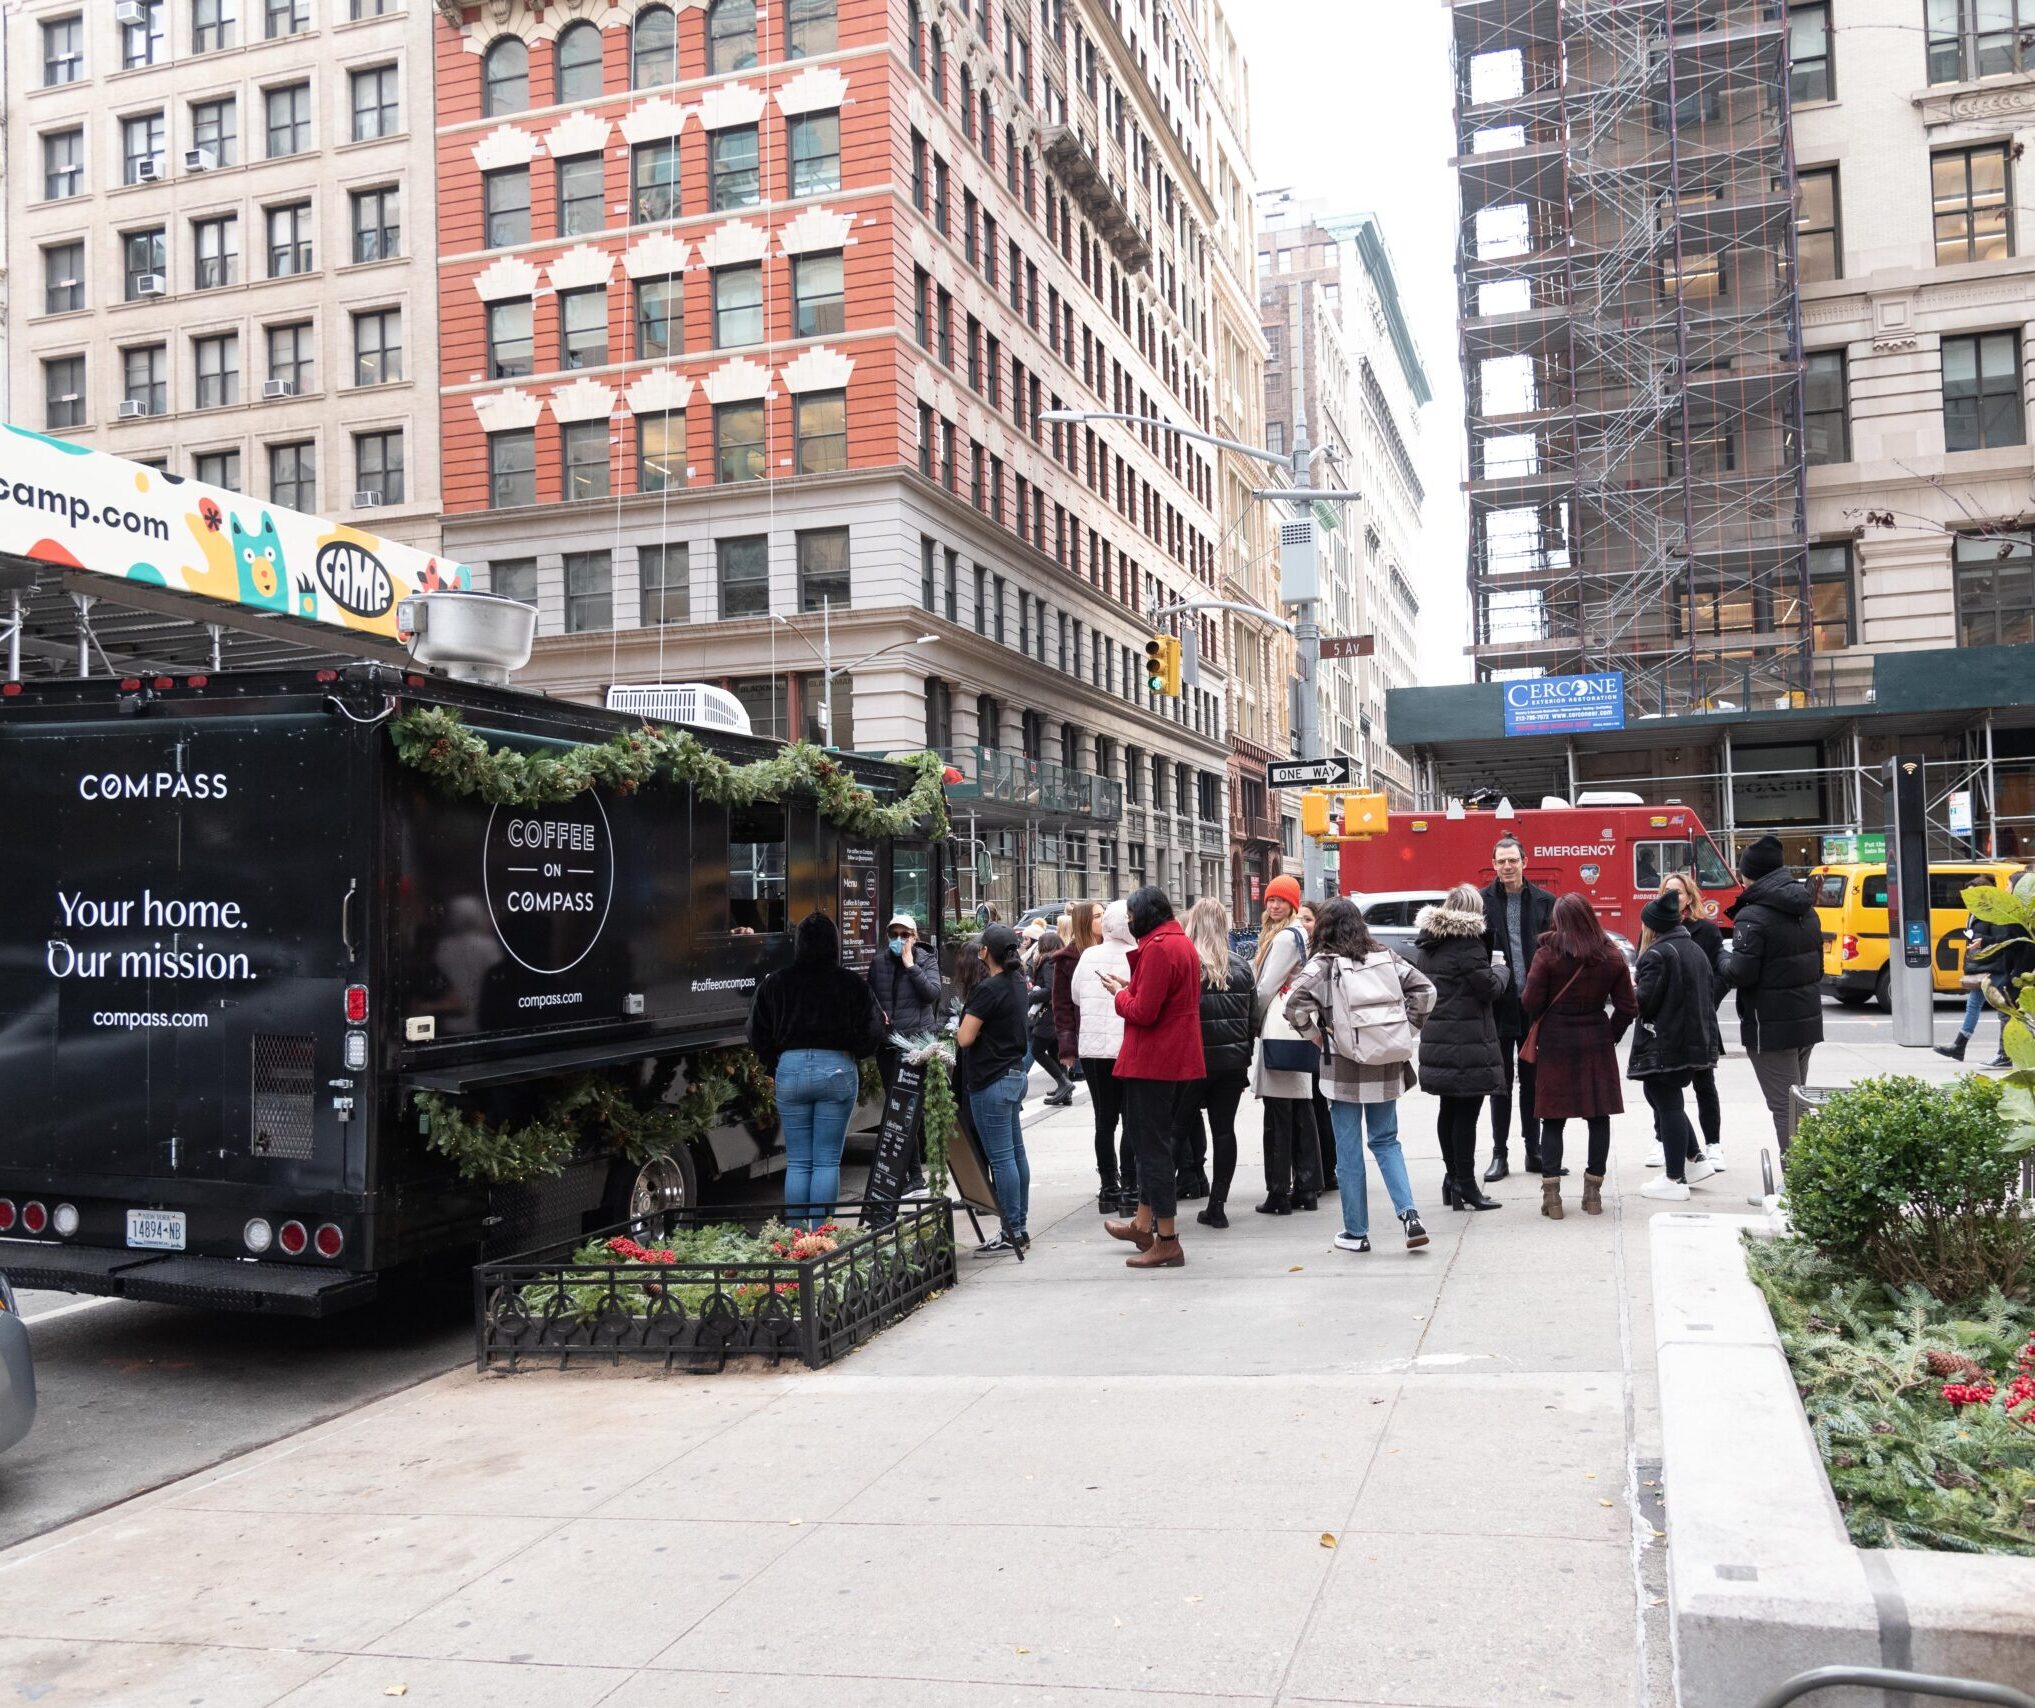 Compass Real Estate Branded Food Truck